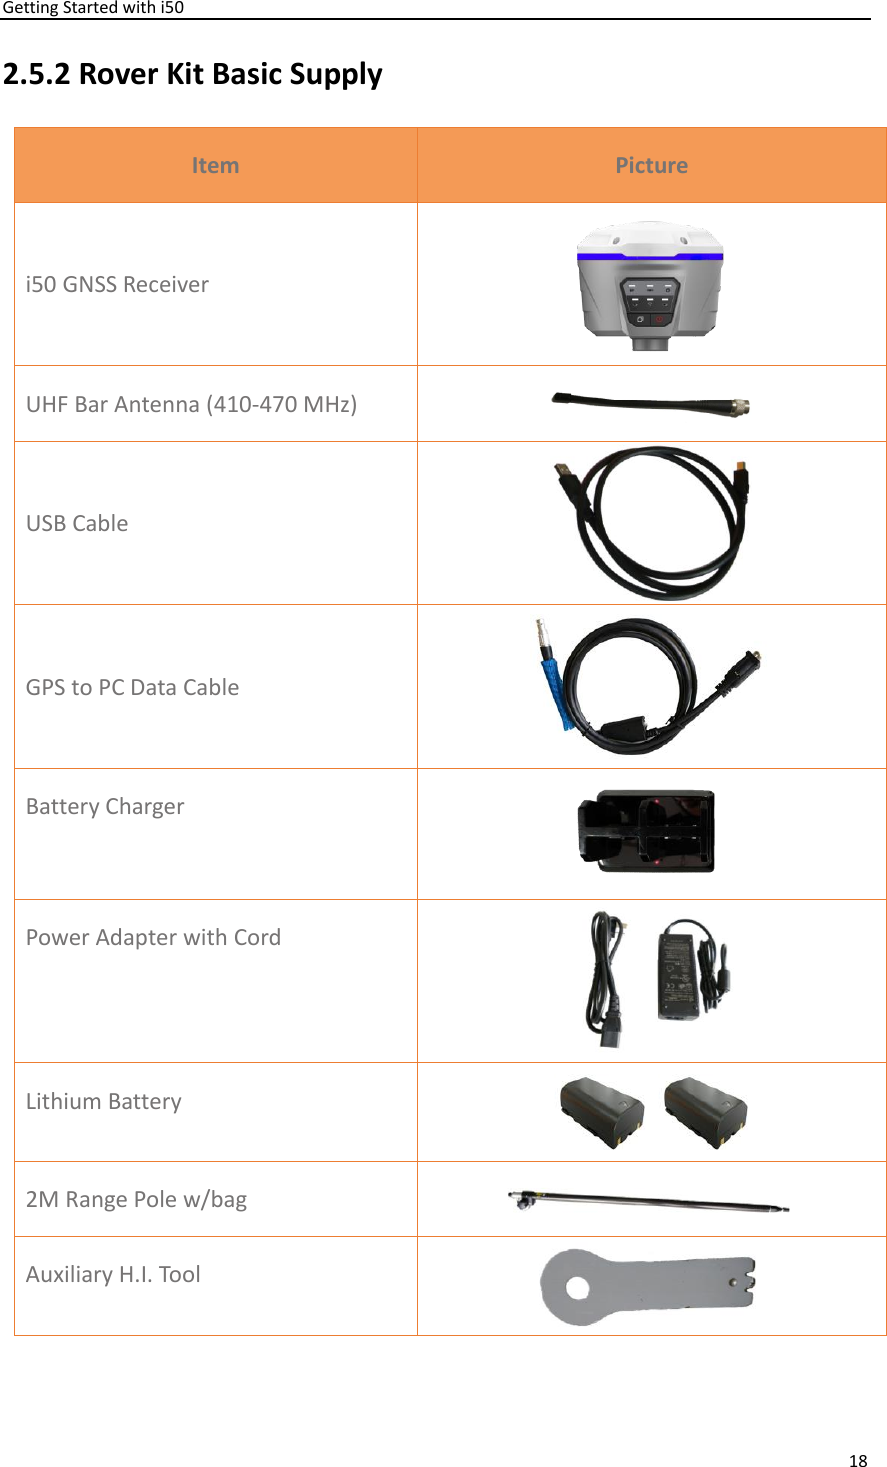 Getting Started with i50 18  2.5.2 Rover Kit Basic Supply Item Picture i50 GNSS Receiver  UHF Bar Antenna (410-470 MHz)  USB Cable  GPS to PC Data Cable  Battery Charger  Power Adapter with Cord  Lithium Battery   2M Range Pole w/bag  Auxiliary H.I. Tool      